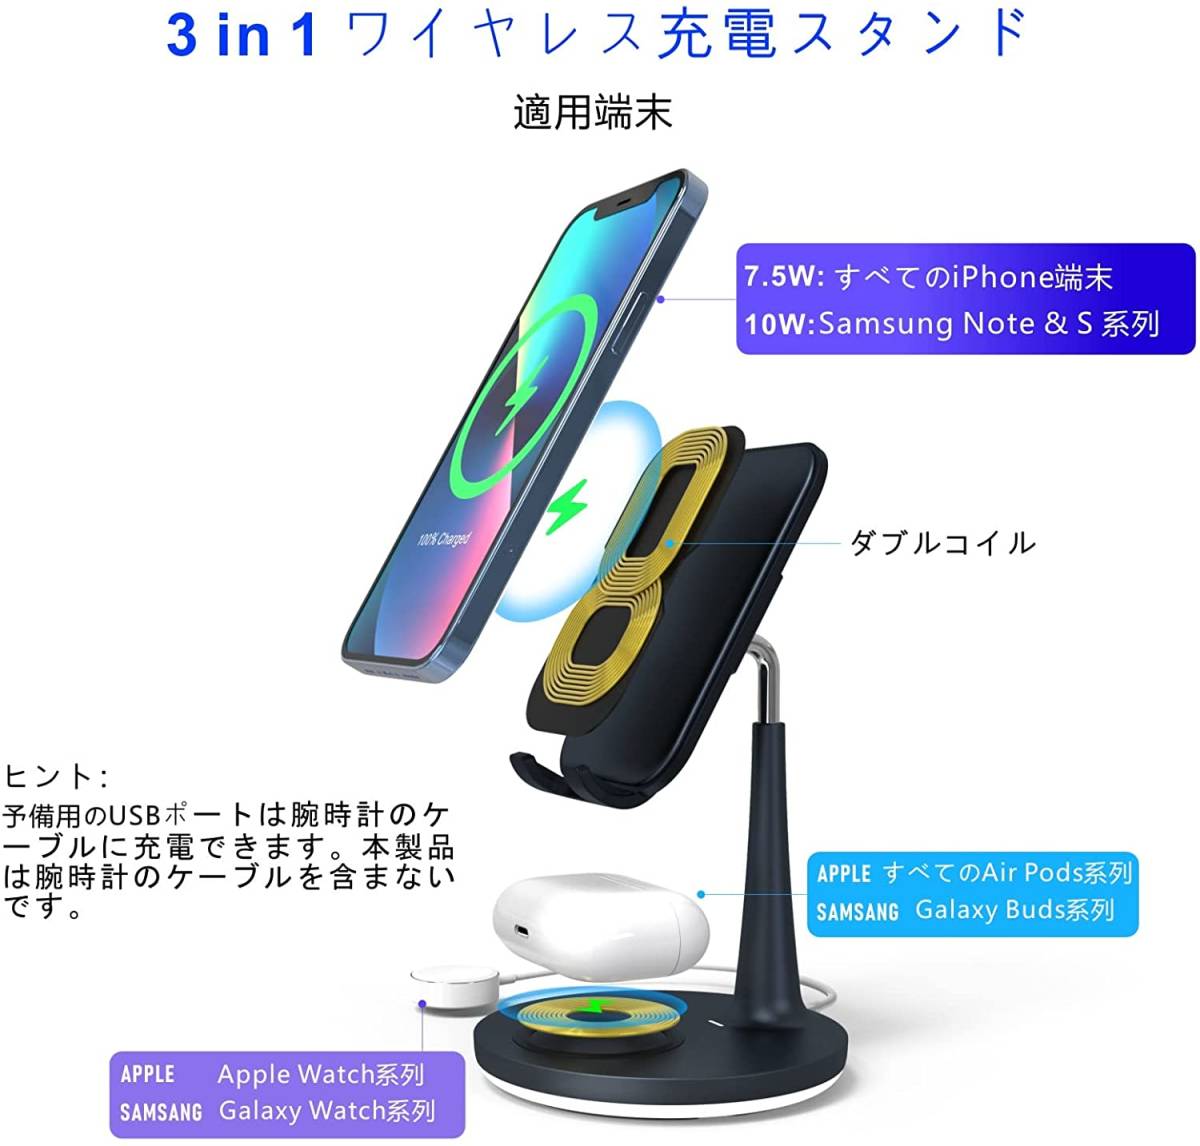 ANPULES ワイヤレス充電ホルダー、ワイヤレス急速充電、 iPhone13/13 Pro Max/13 Mini/13/12 Series/11/XR/XS/X/8+， AirPods 充電器 